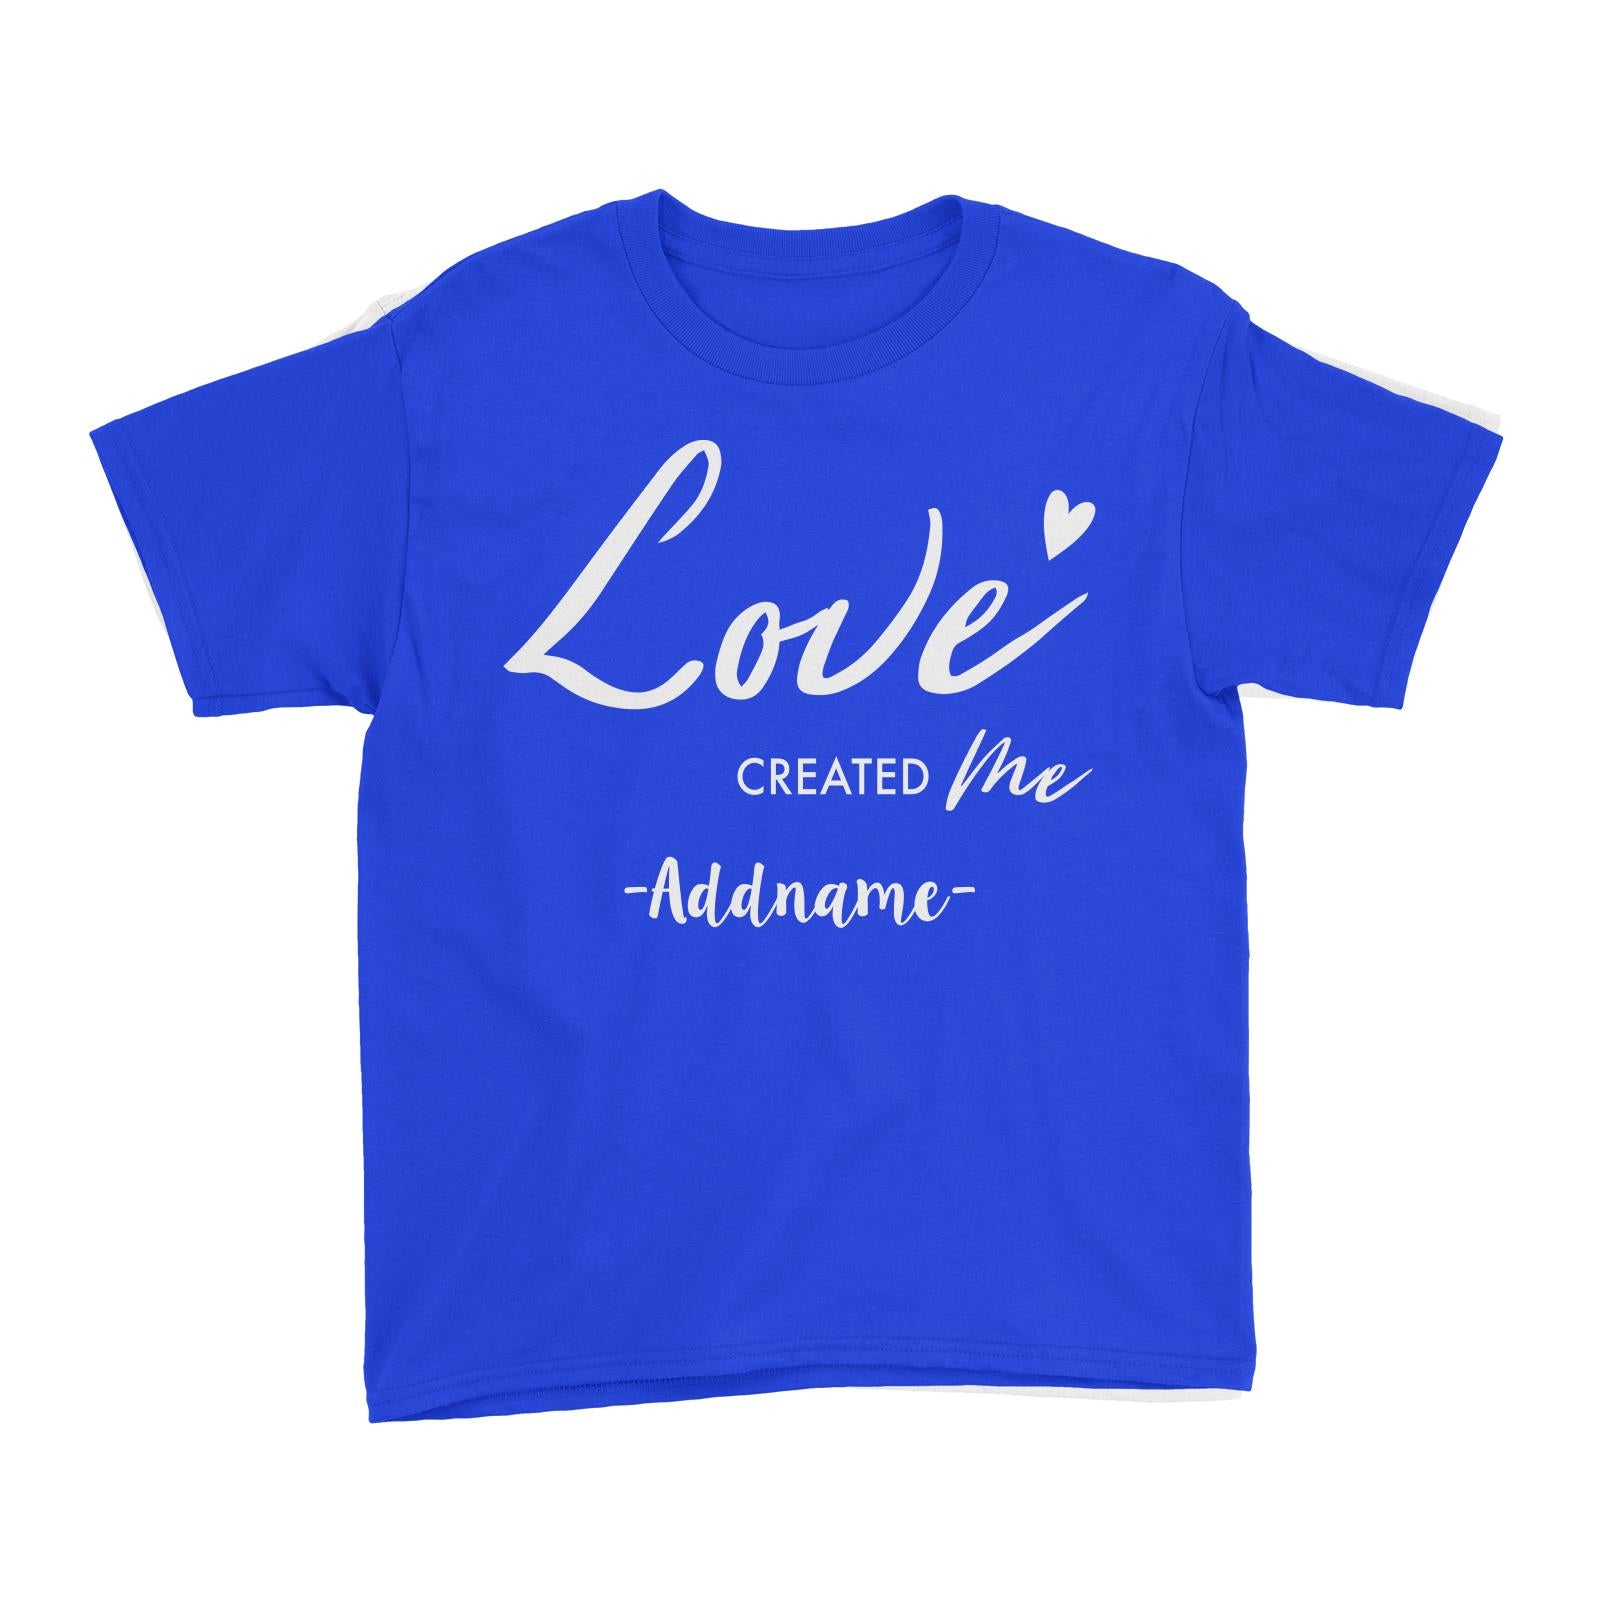 Love Created Me Addname Kid's T-Shirt  Matching Family Personalizable Designs